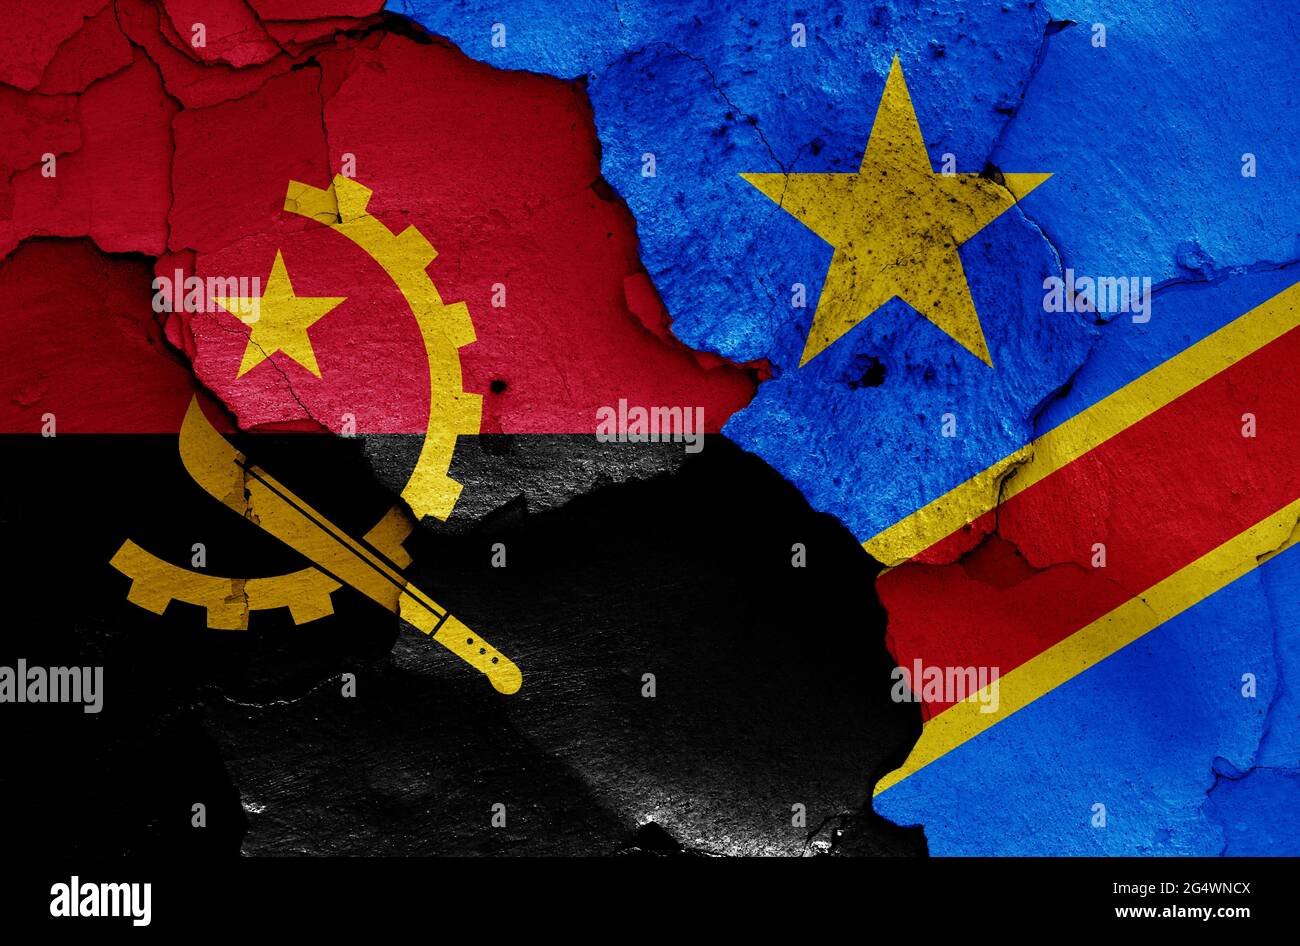 flags of Angola and DR Congo painted on cracked wall Stock Photo